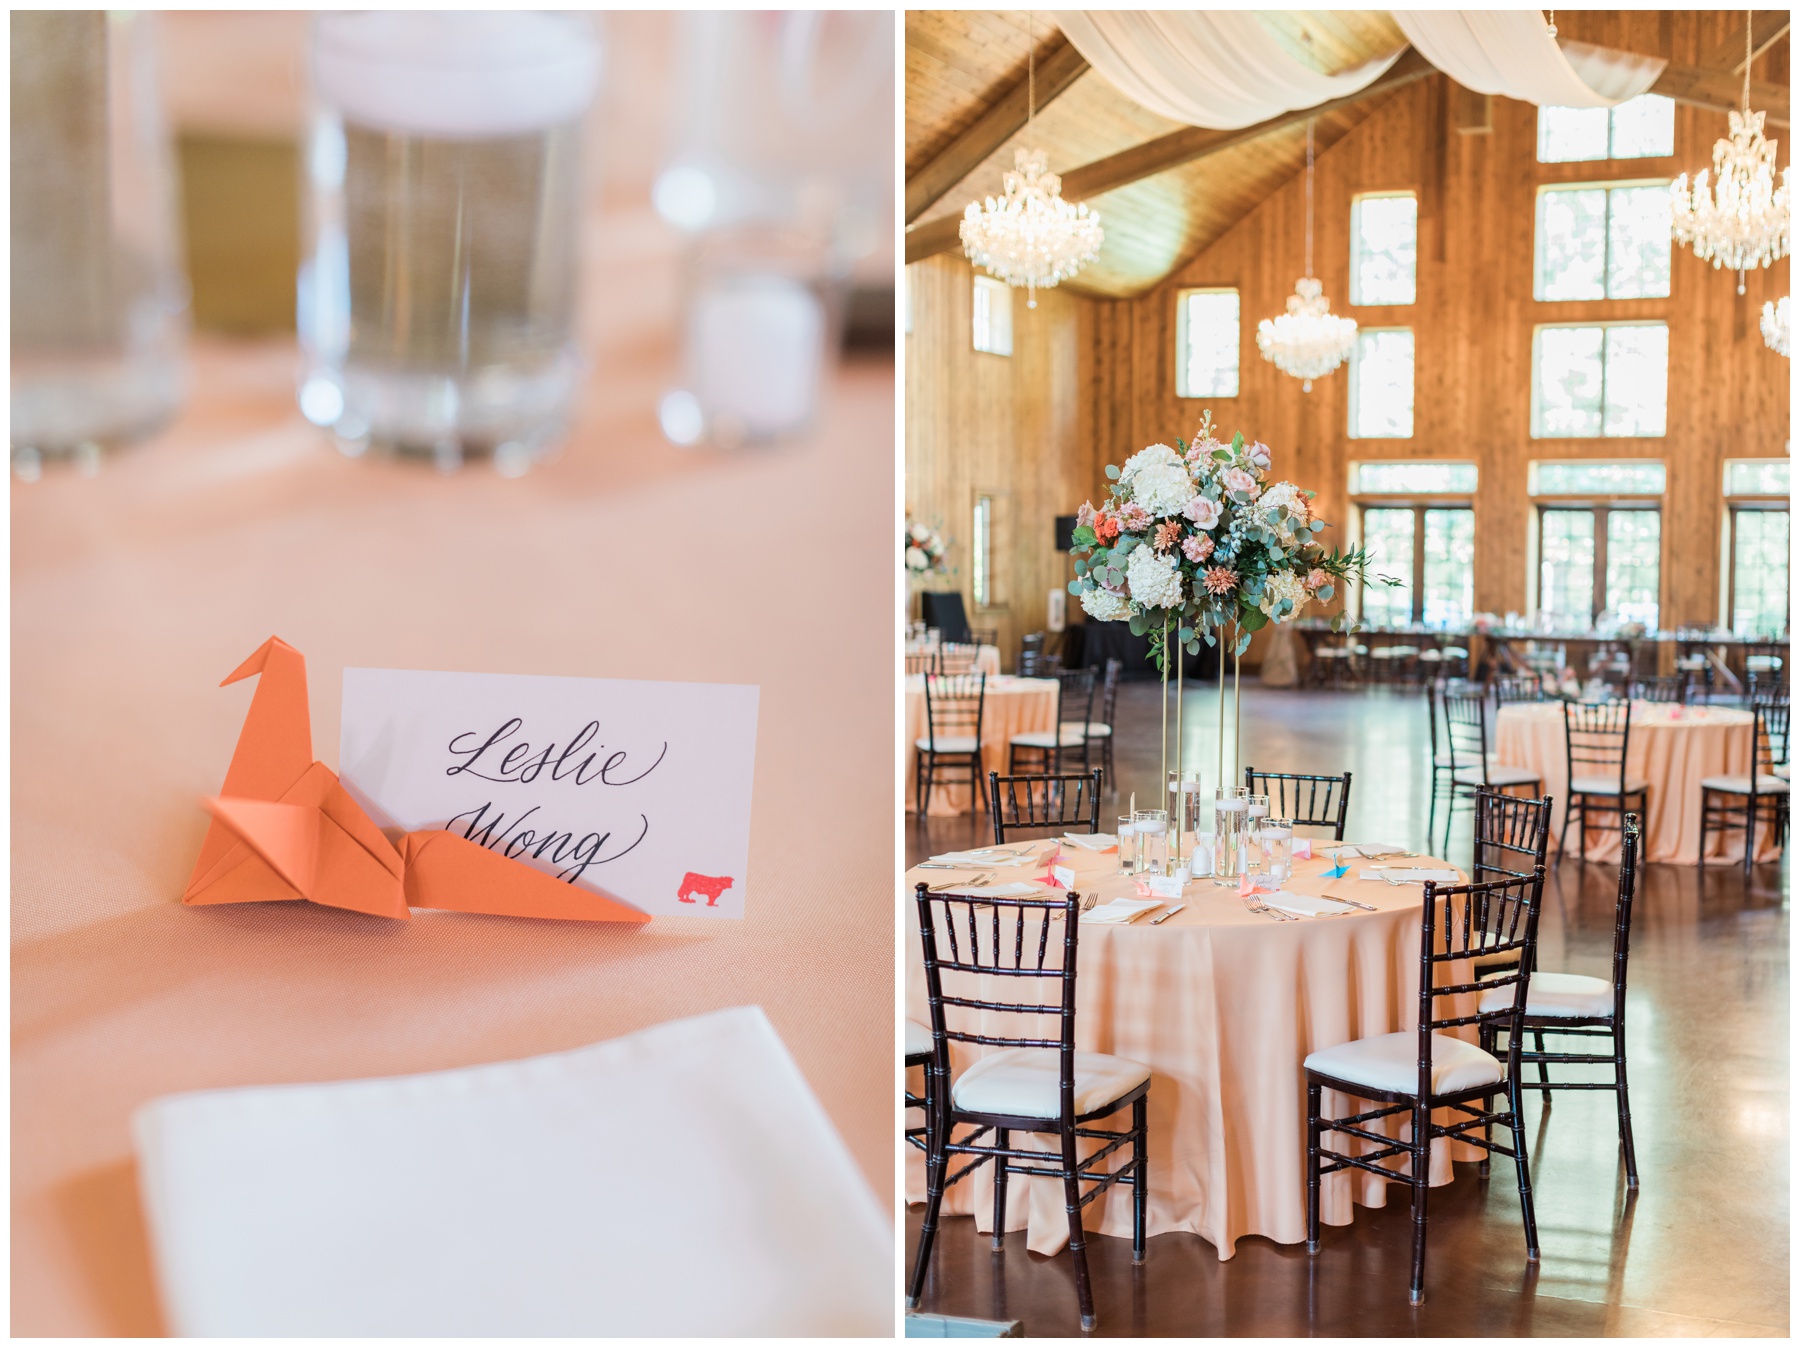 Peach linens and place cards with paper cranes at a wedding reception